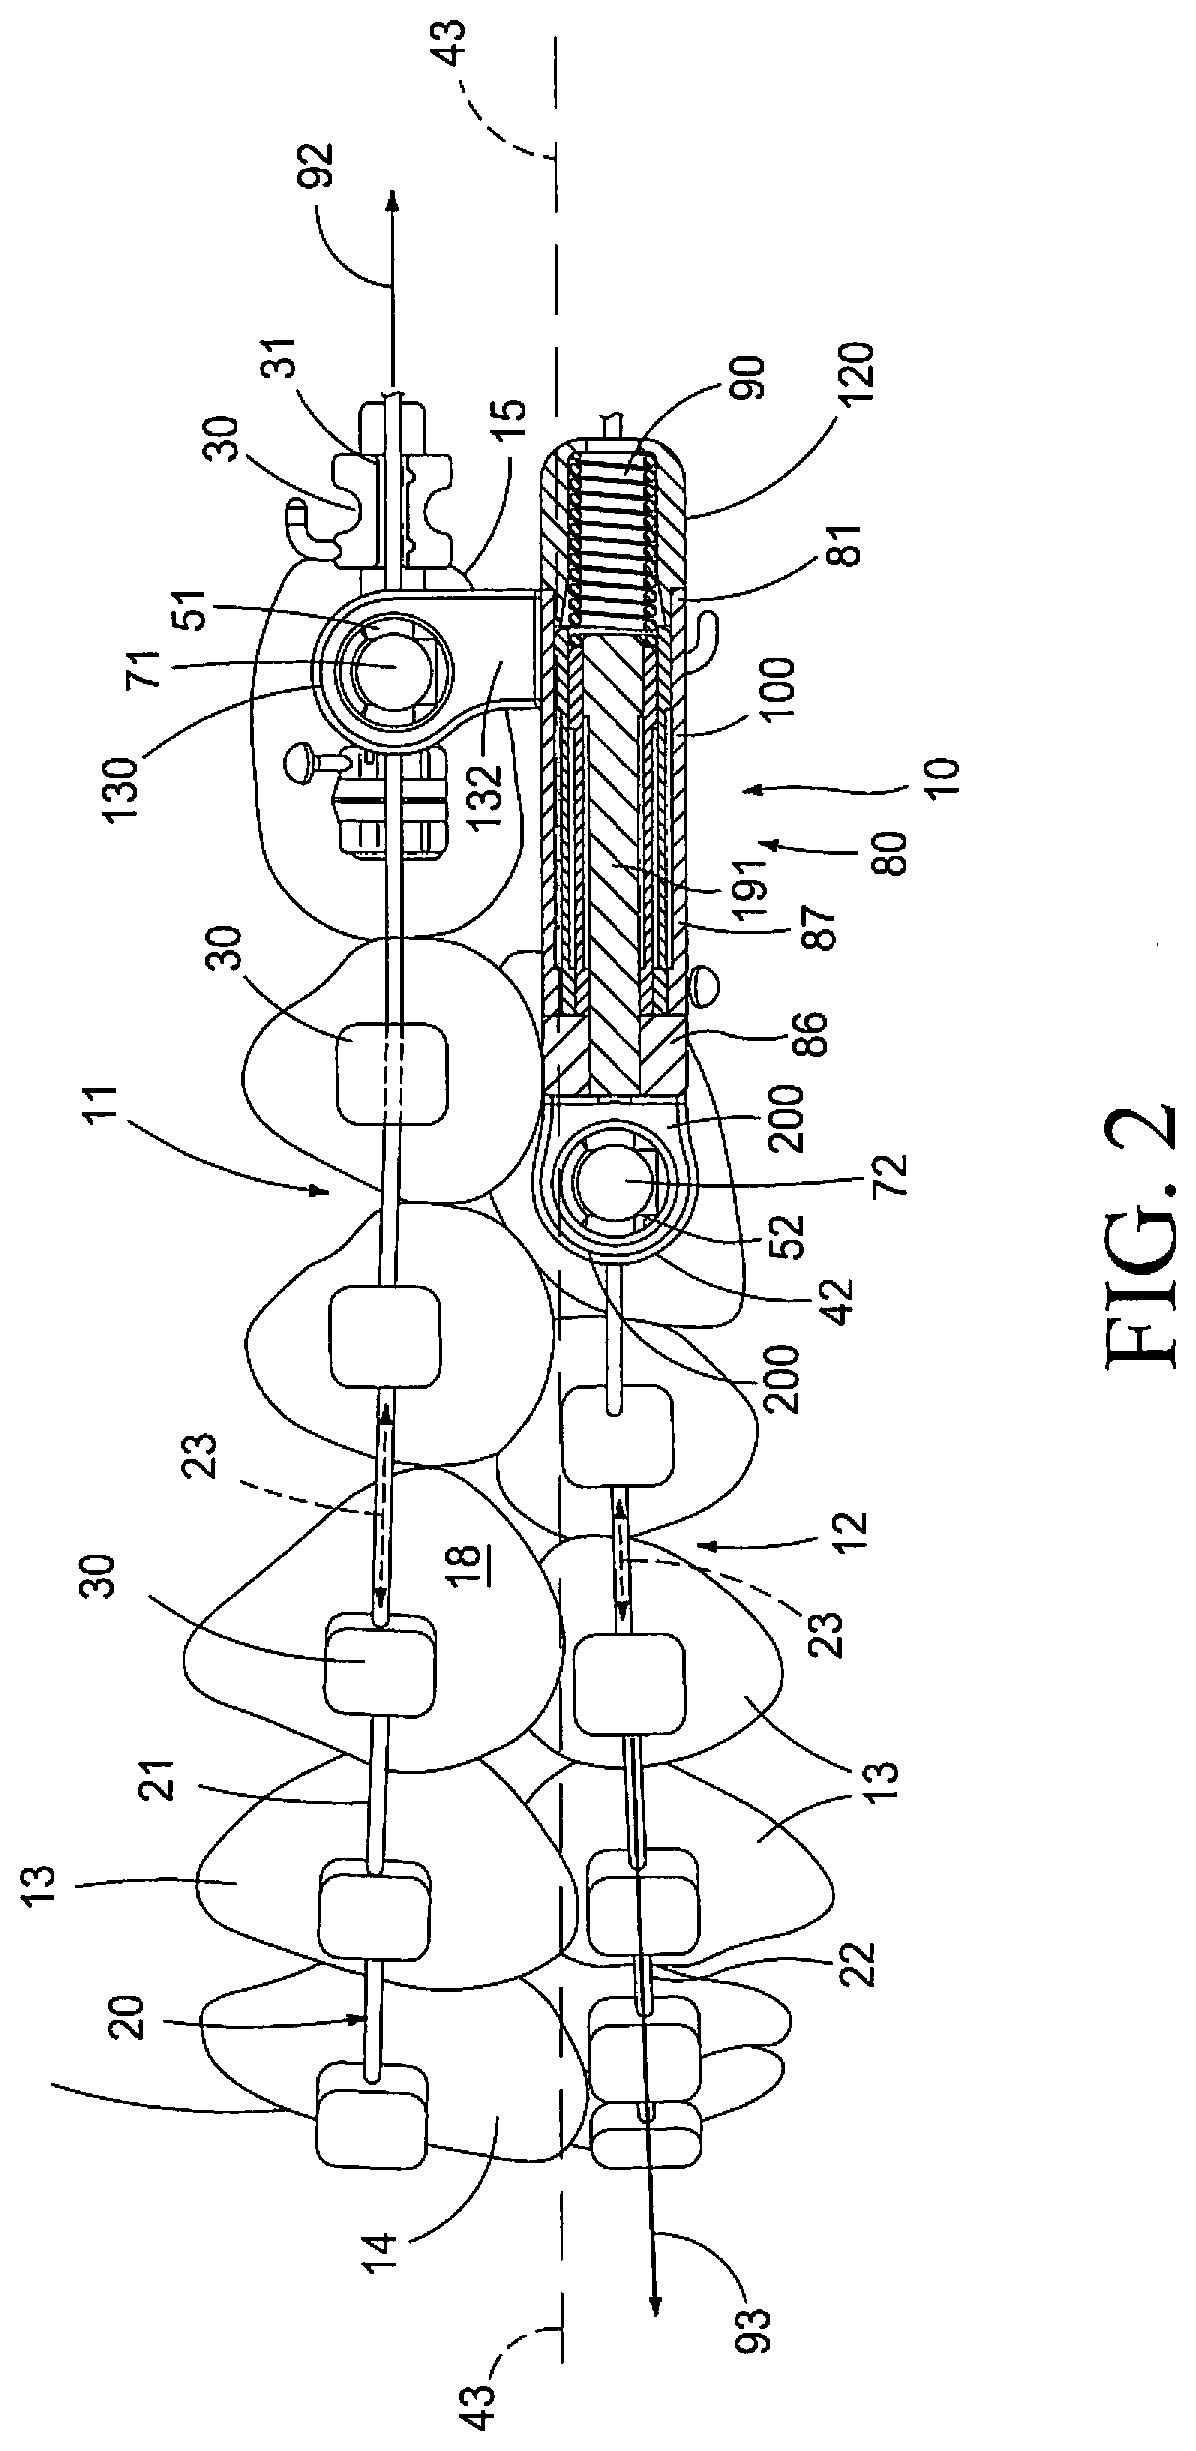 Method and Apparatus for Treating Malocclusions and Teeth Alignment